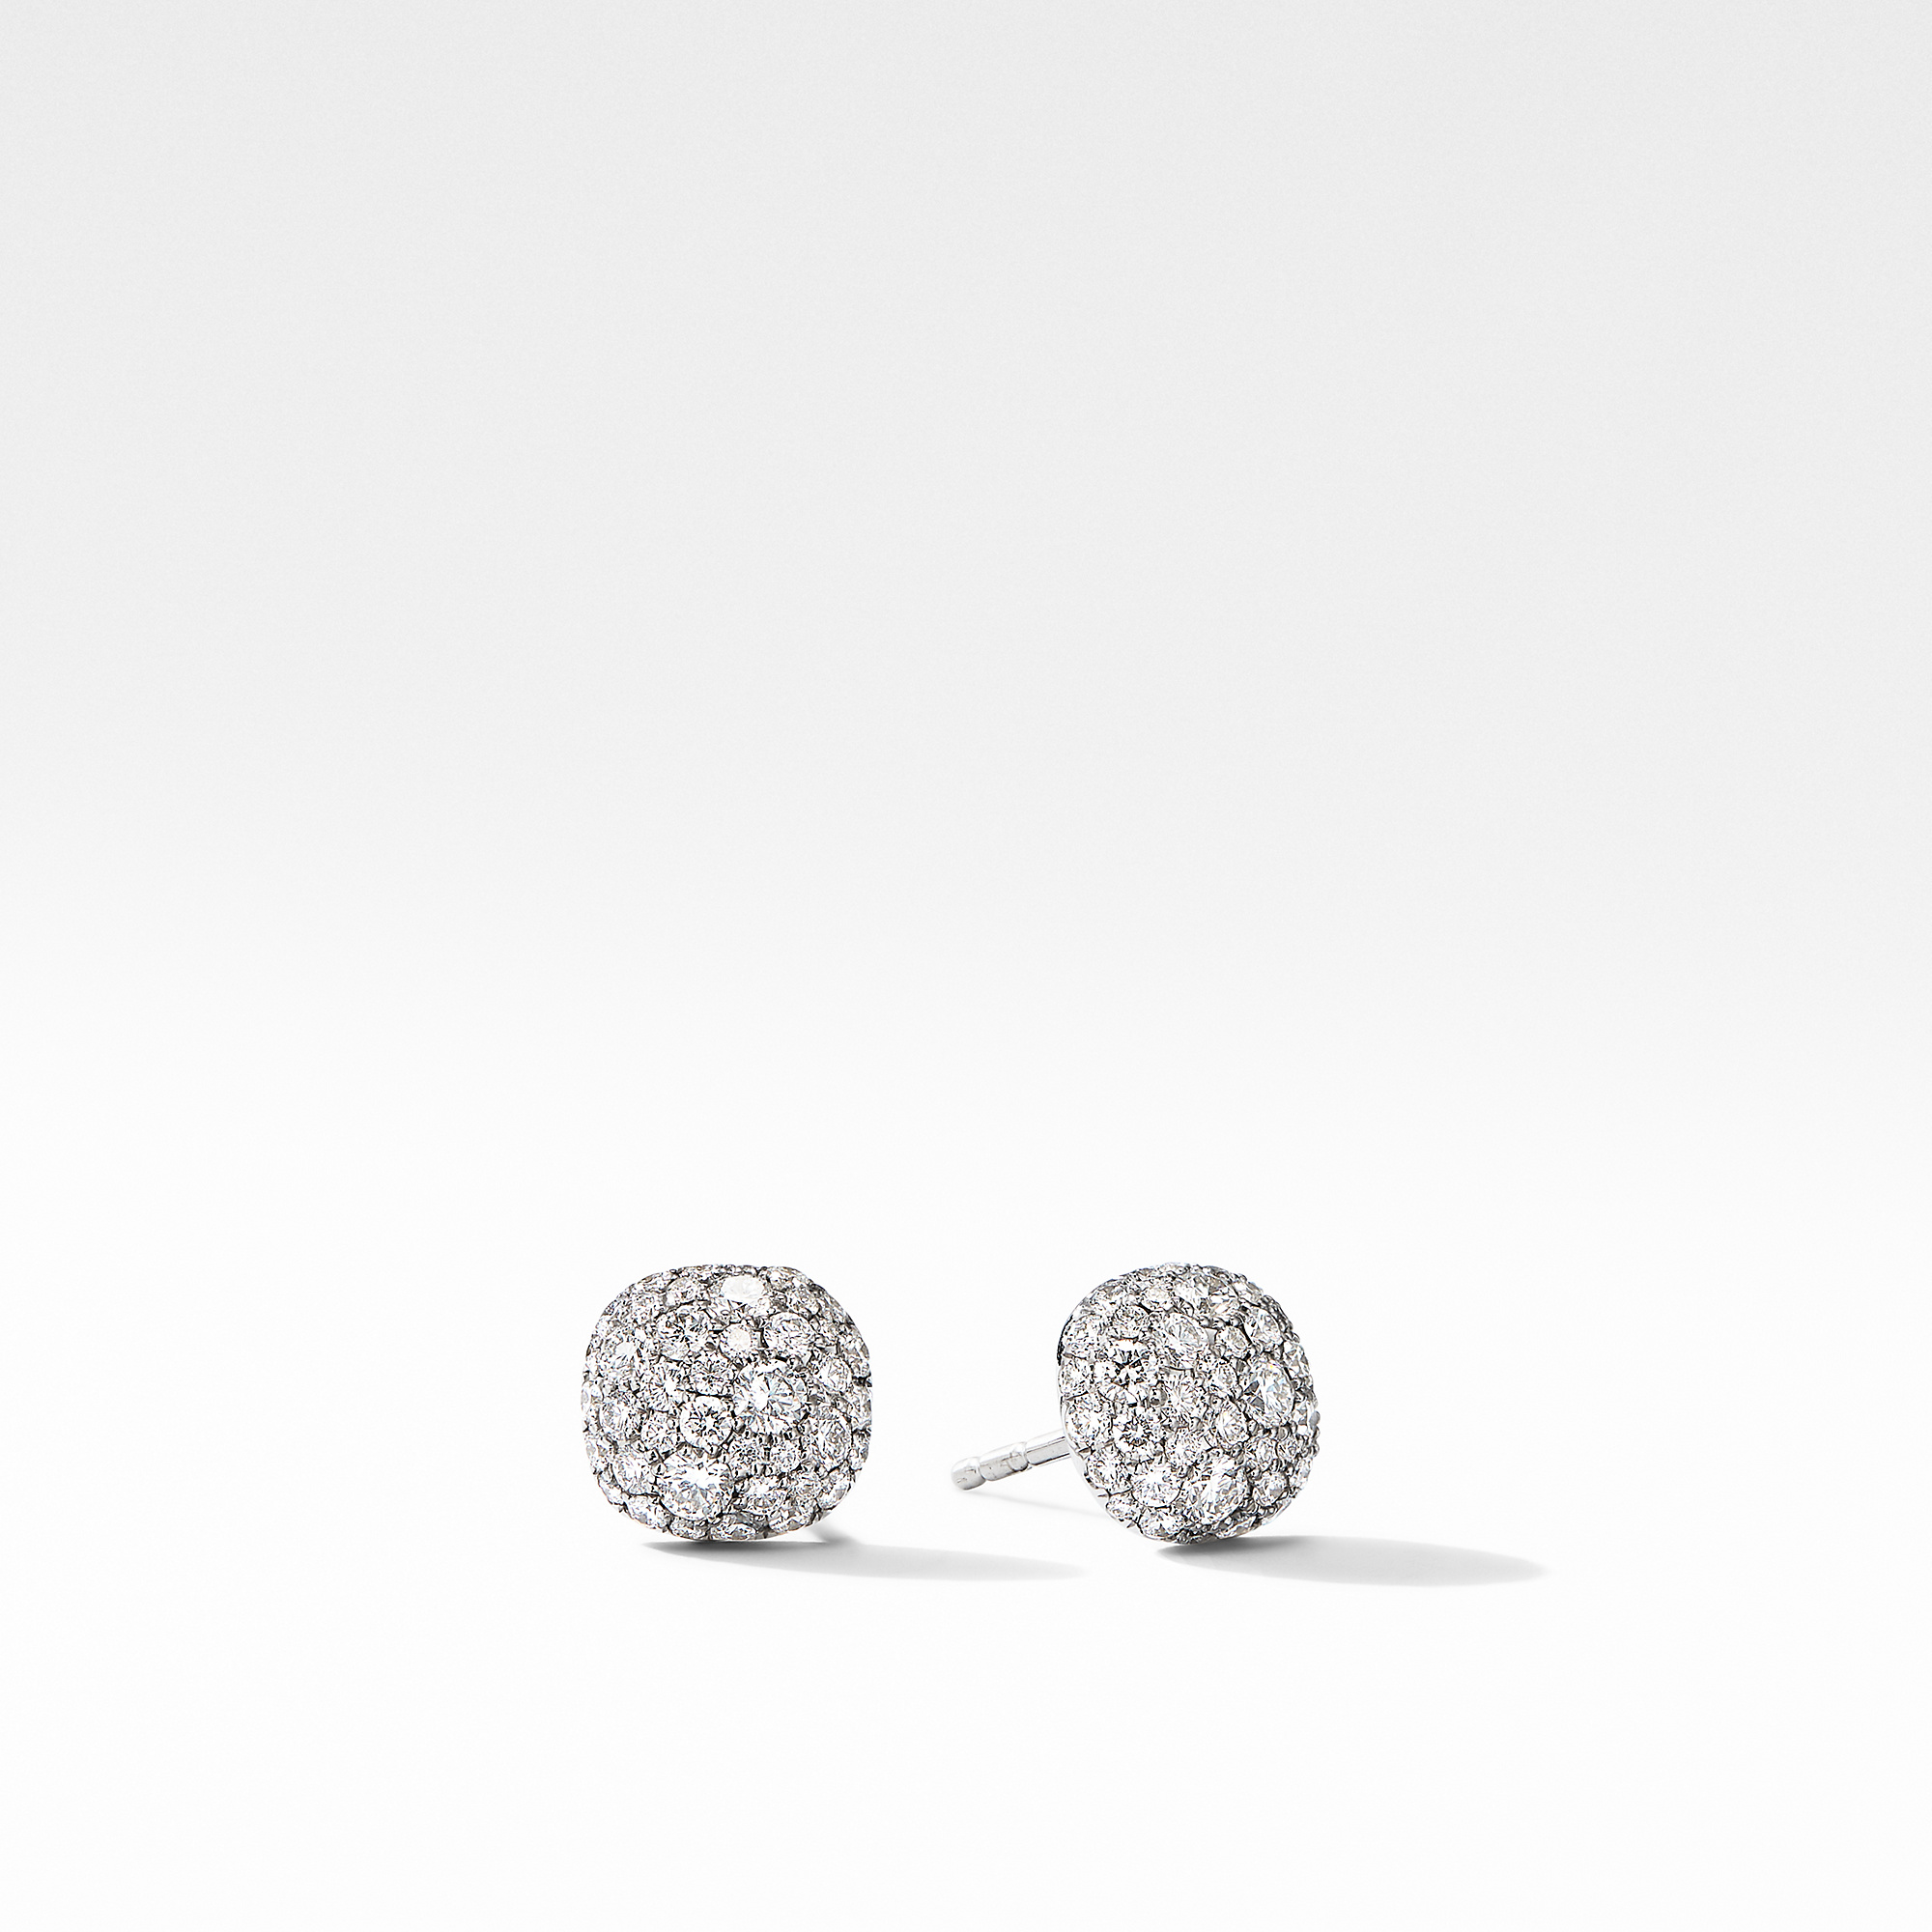 Small Cushion Stud Earrings in 18K White Gold with Pave Diamonds